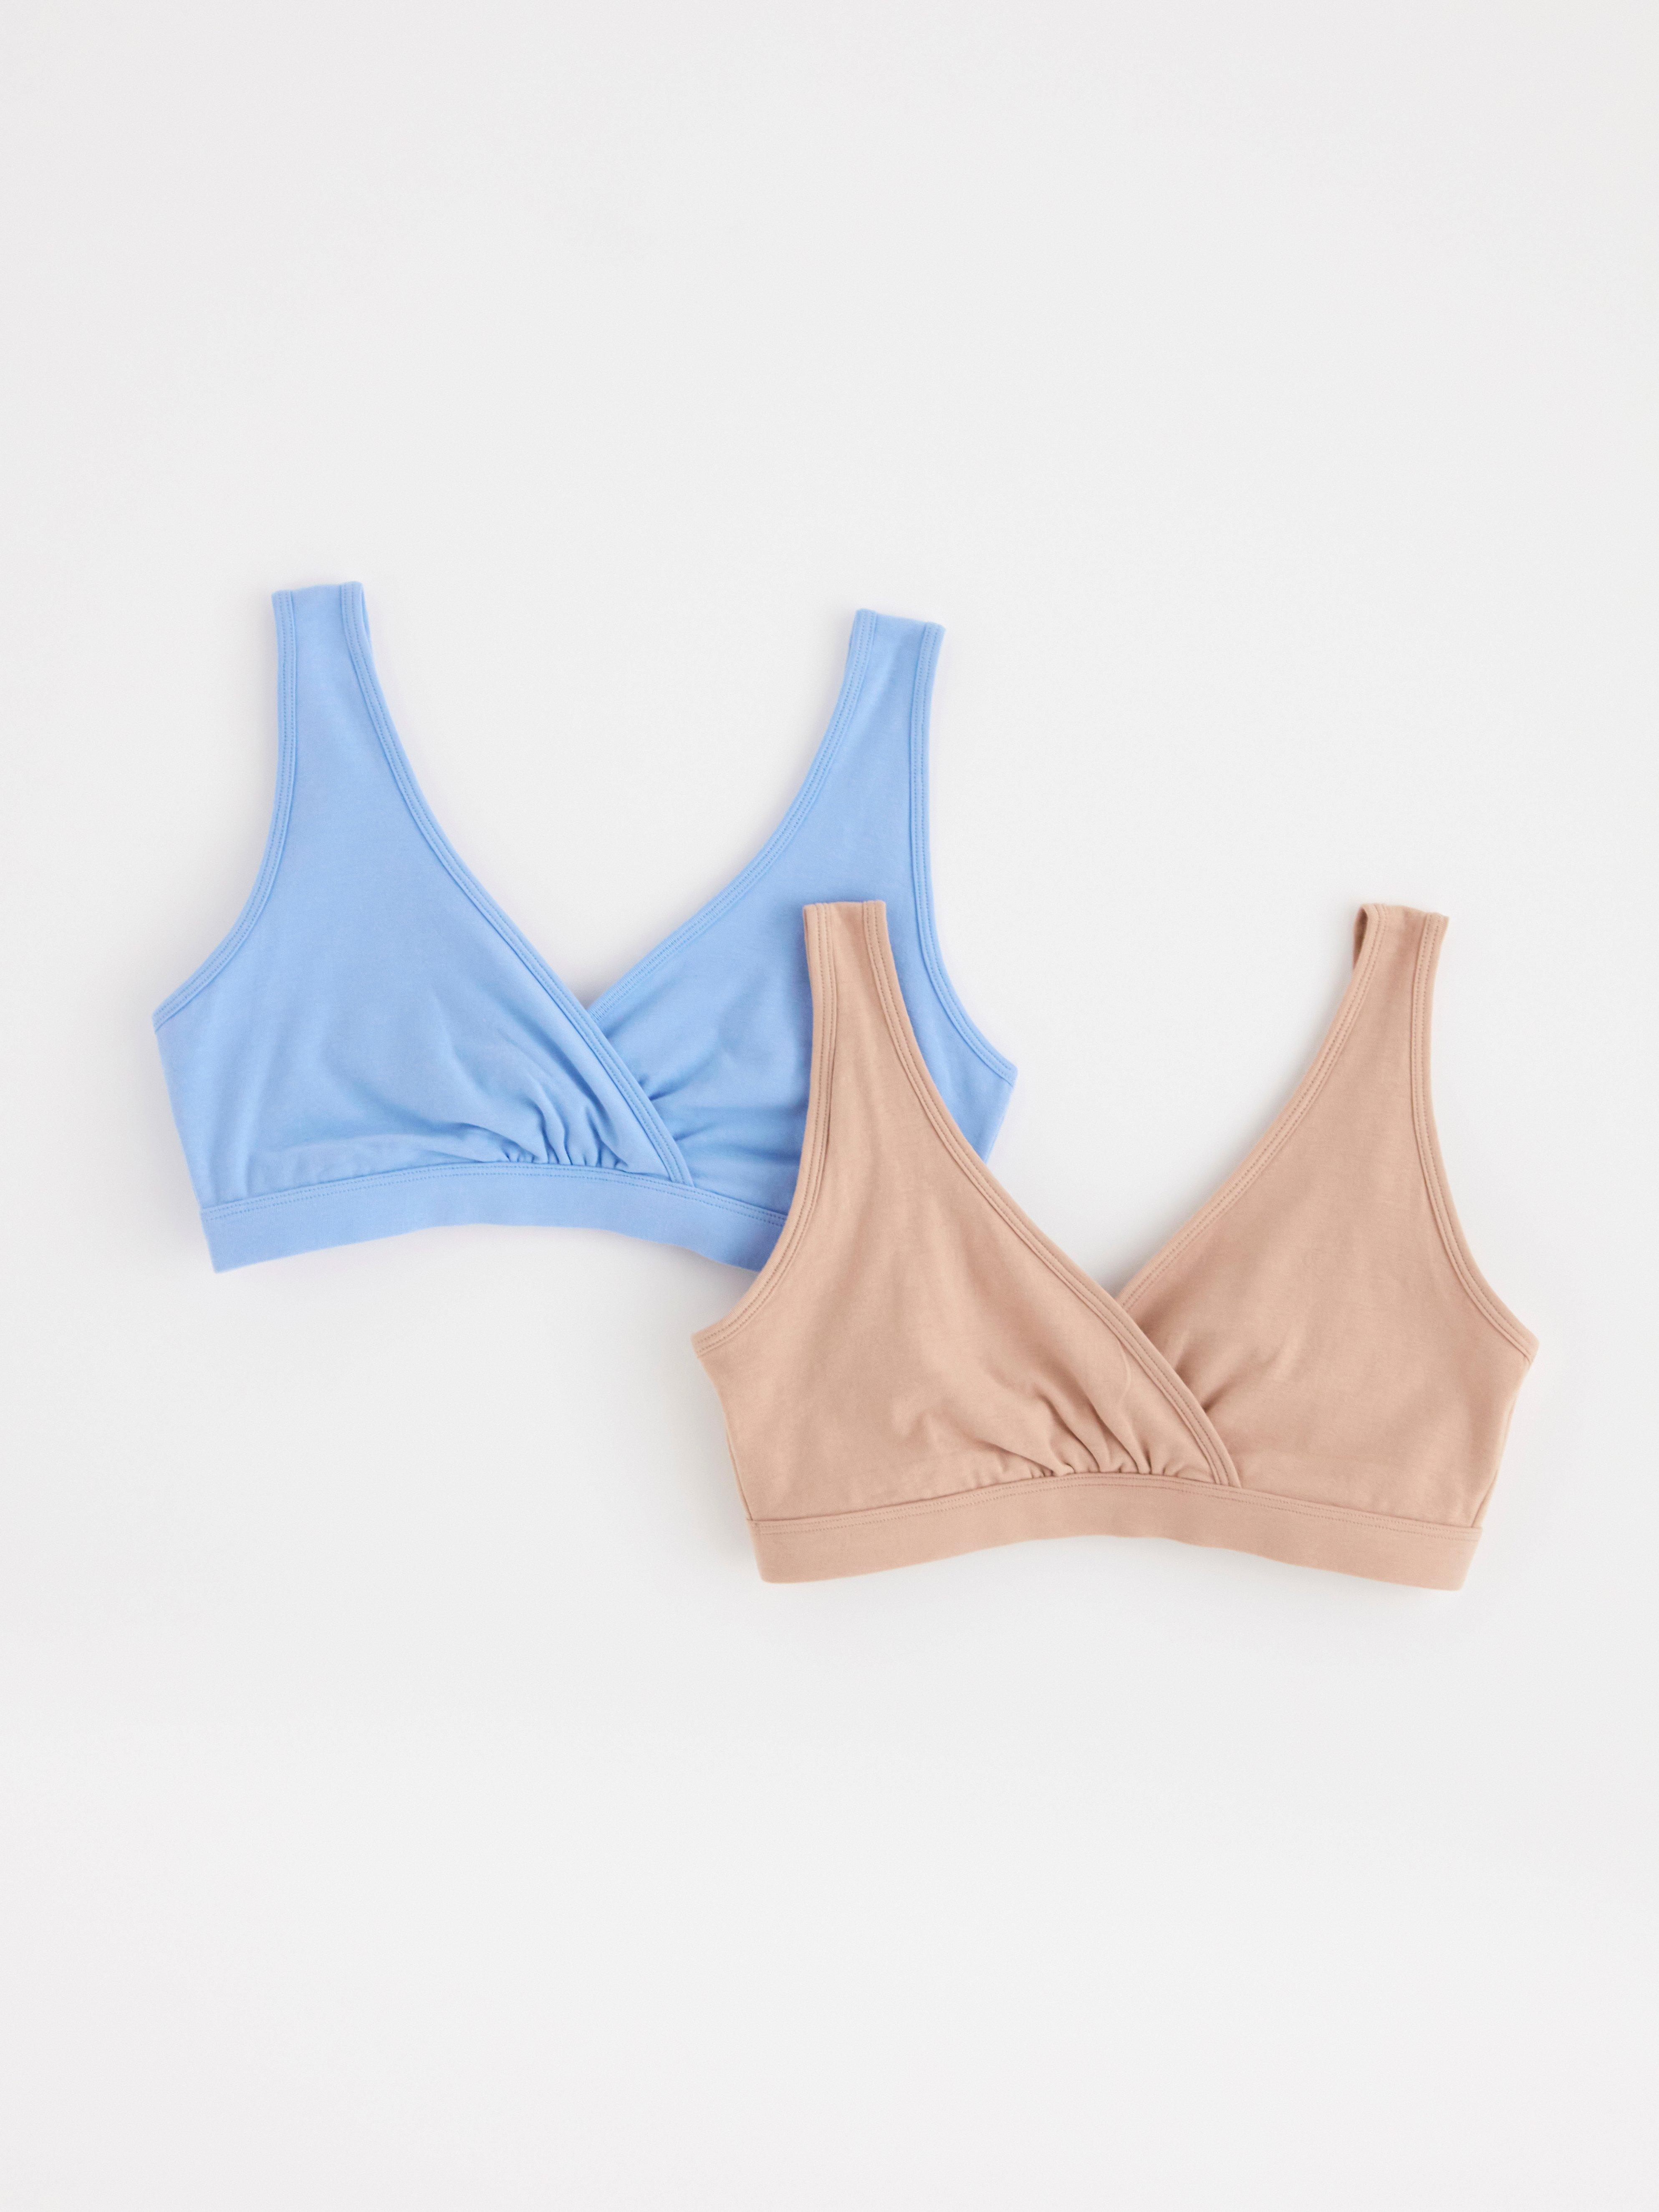 Lindex - We are here for you when you're busy being a hero. Our soft  nursing bras will make life a little easier during this precious time of  yours. #Lindex Shop here